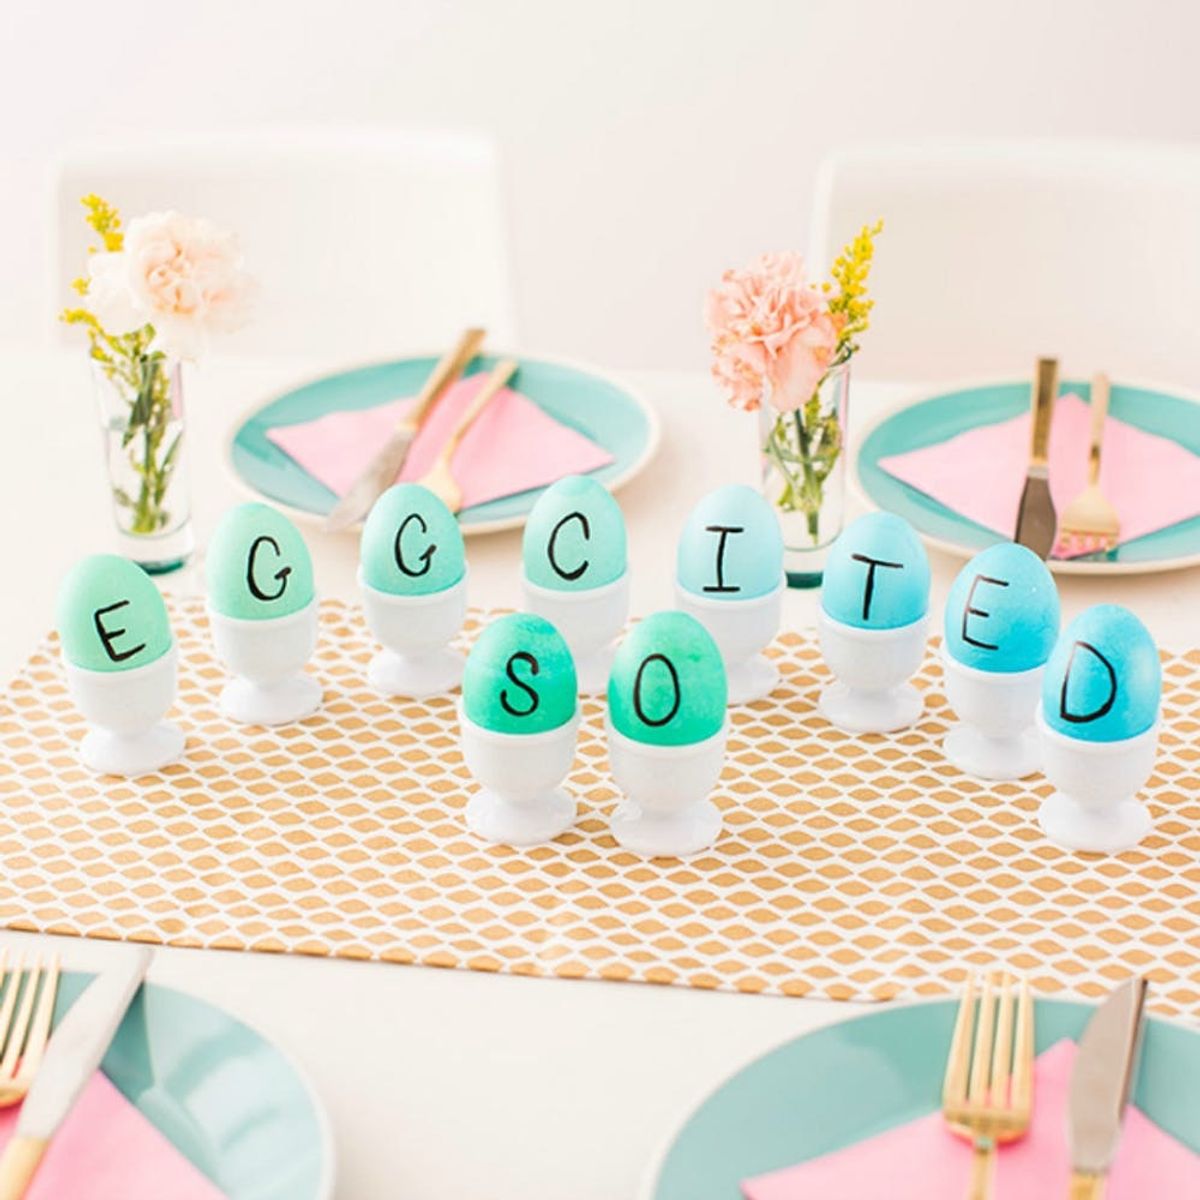 Egg-citing DIY Easter Decorations